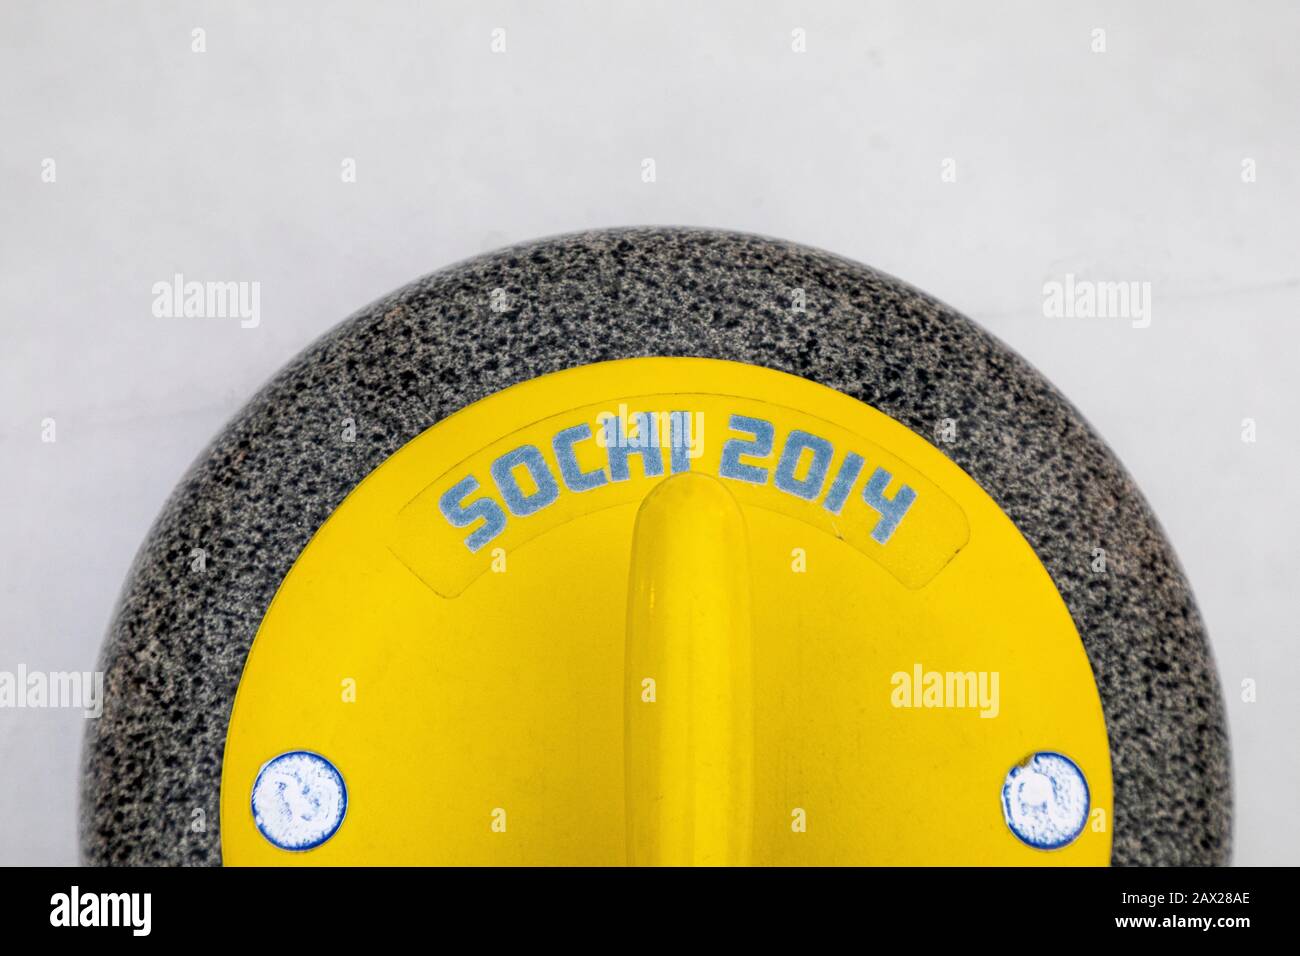 Top view of a yellow granite stone for Curling with the inscription 'Sochi 2014' Stock Photo